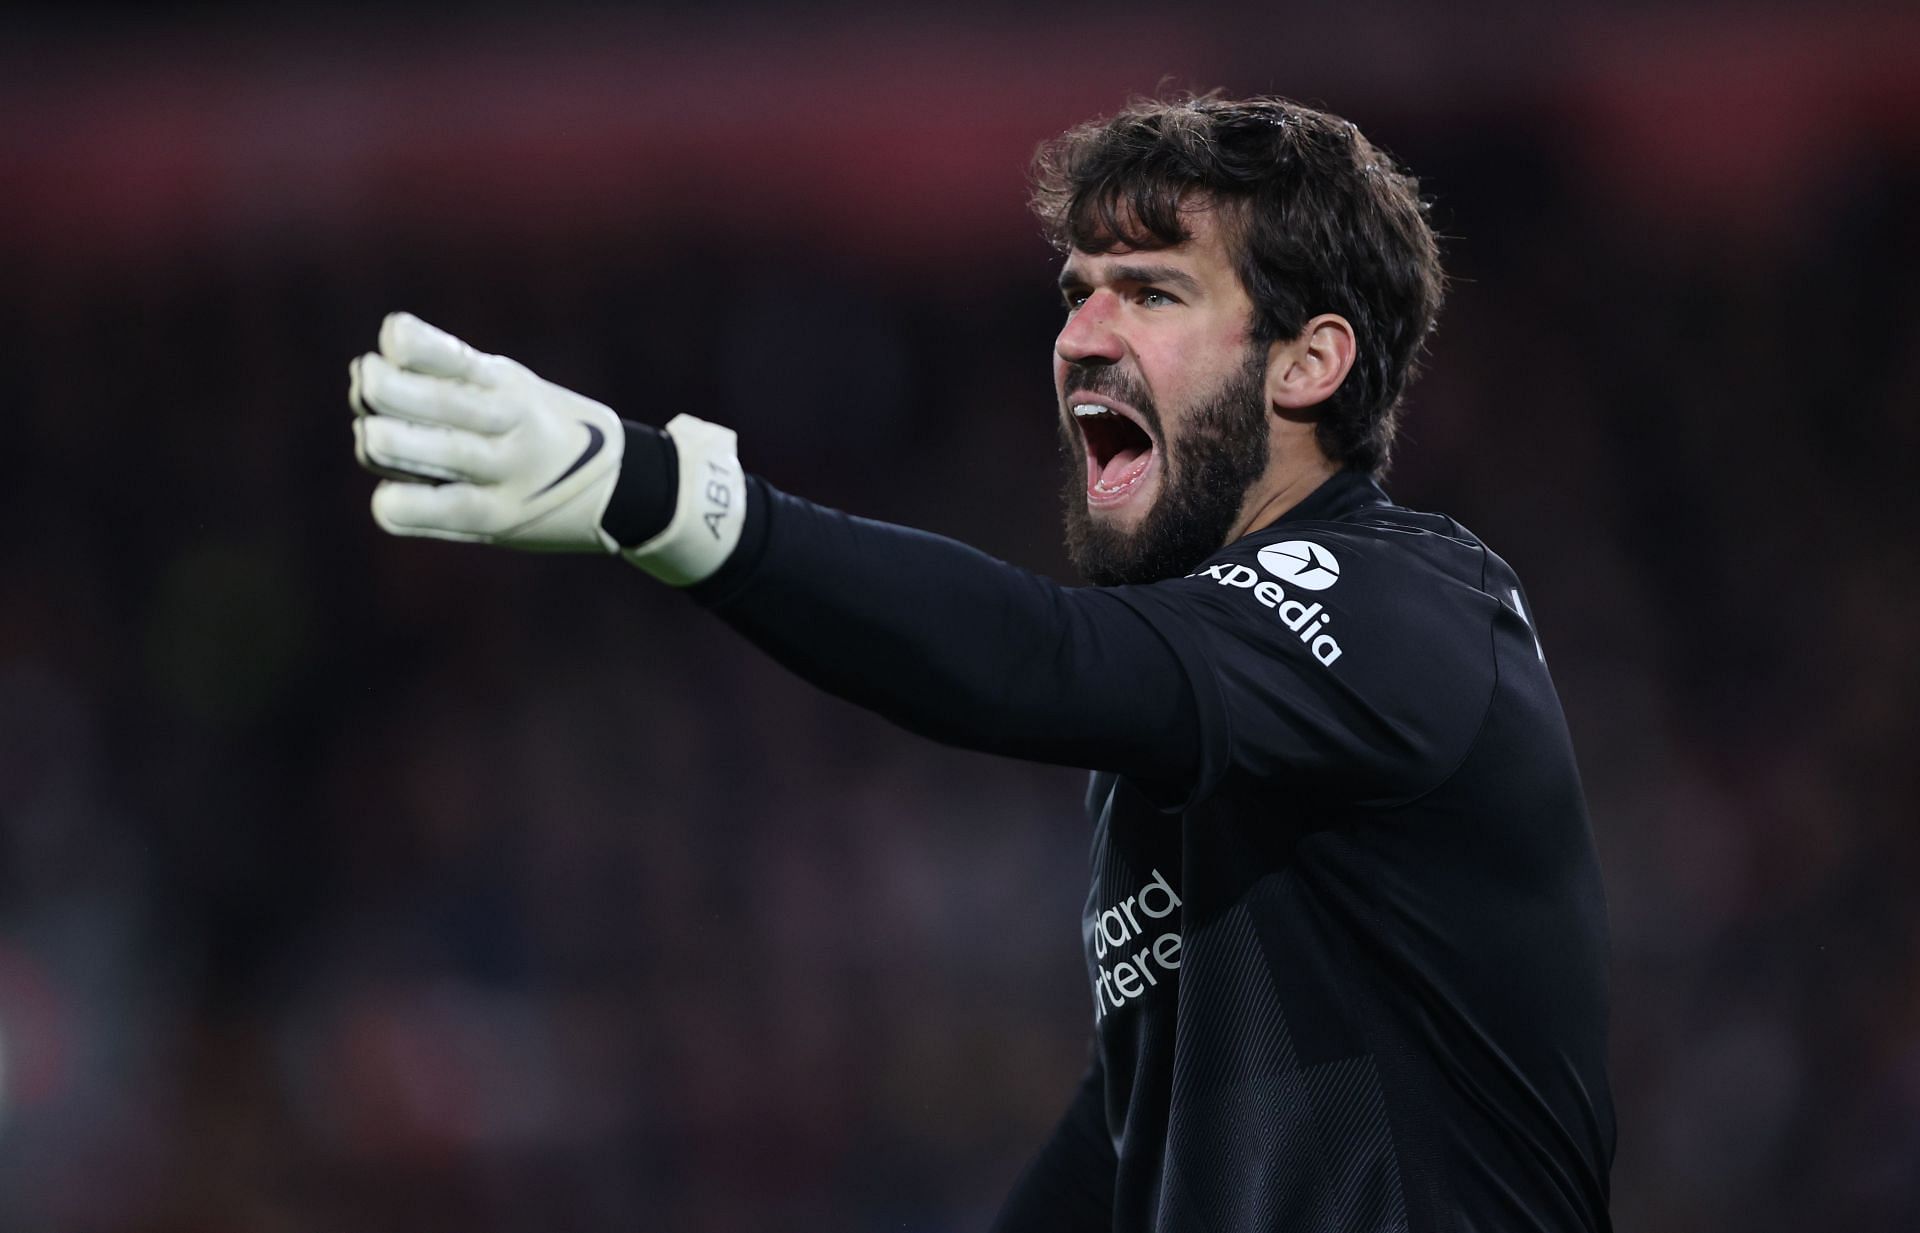 Alisson Becker has sizzled at Liverpool since his arrival at the club.